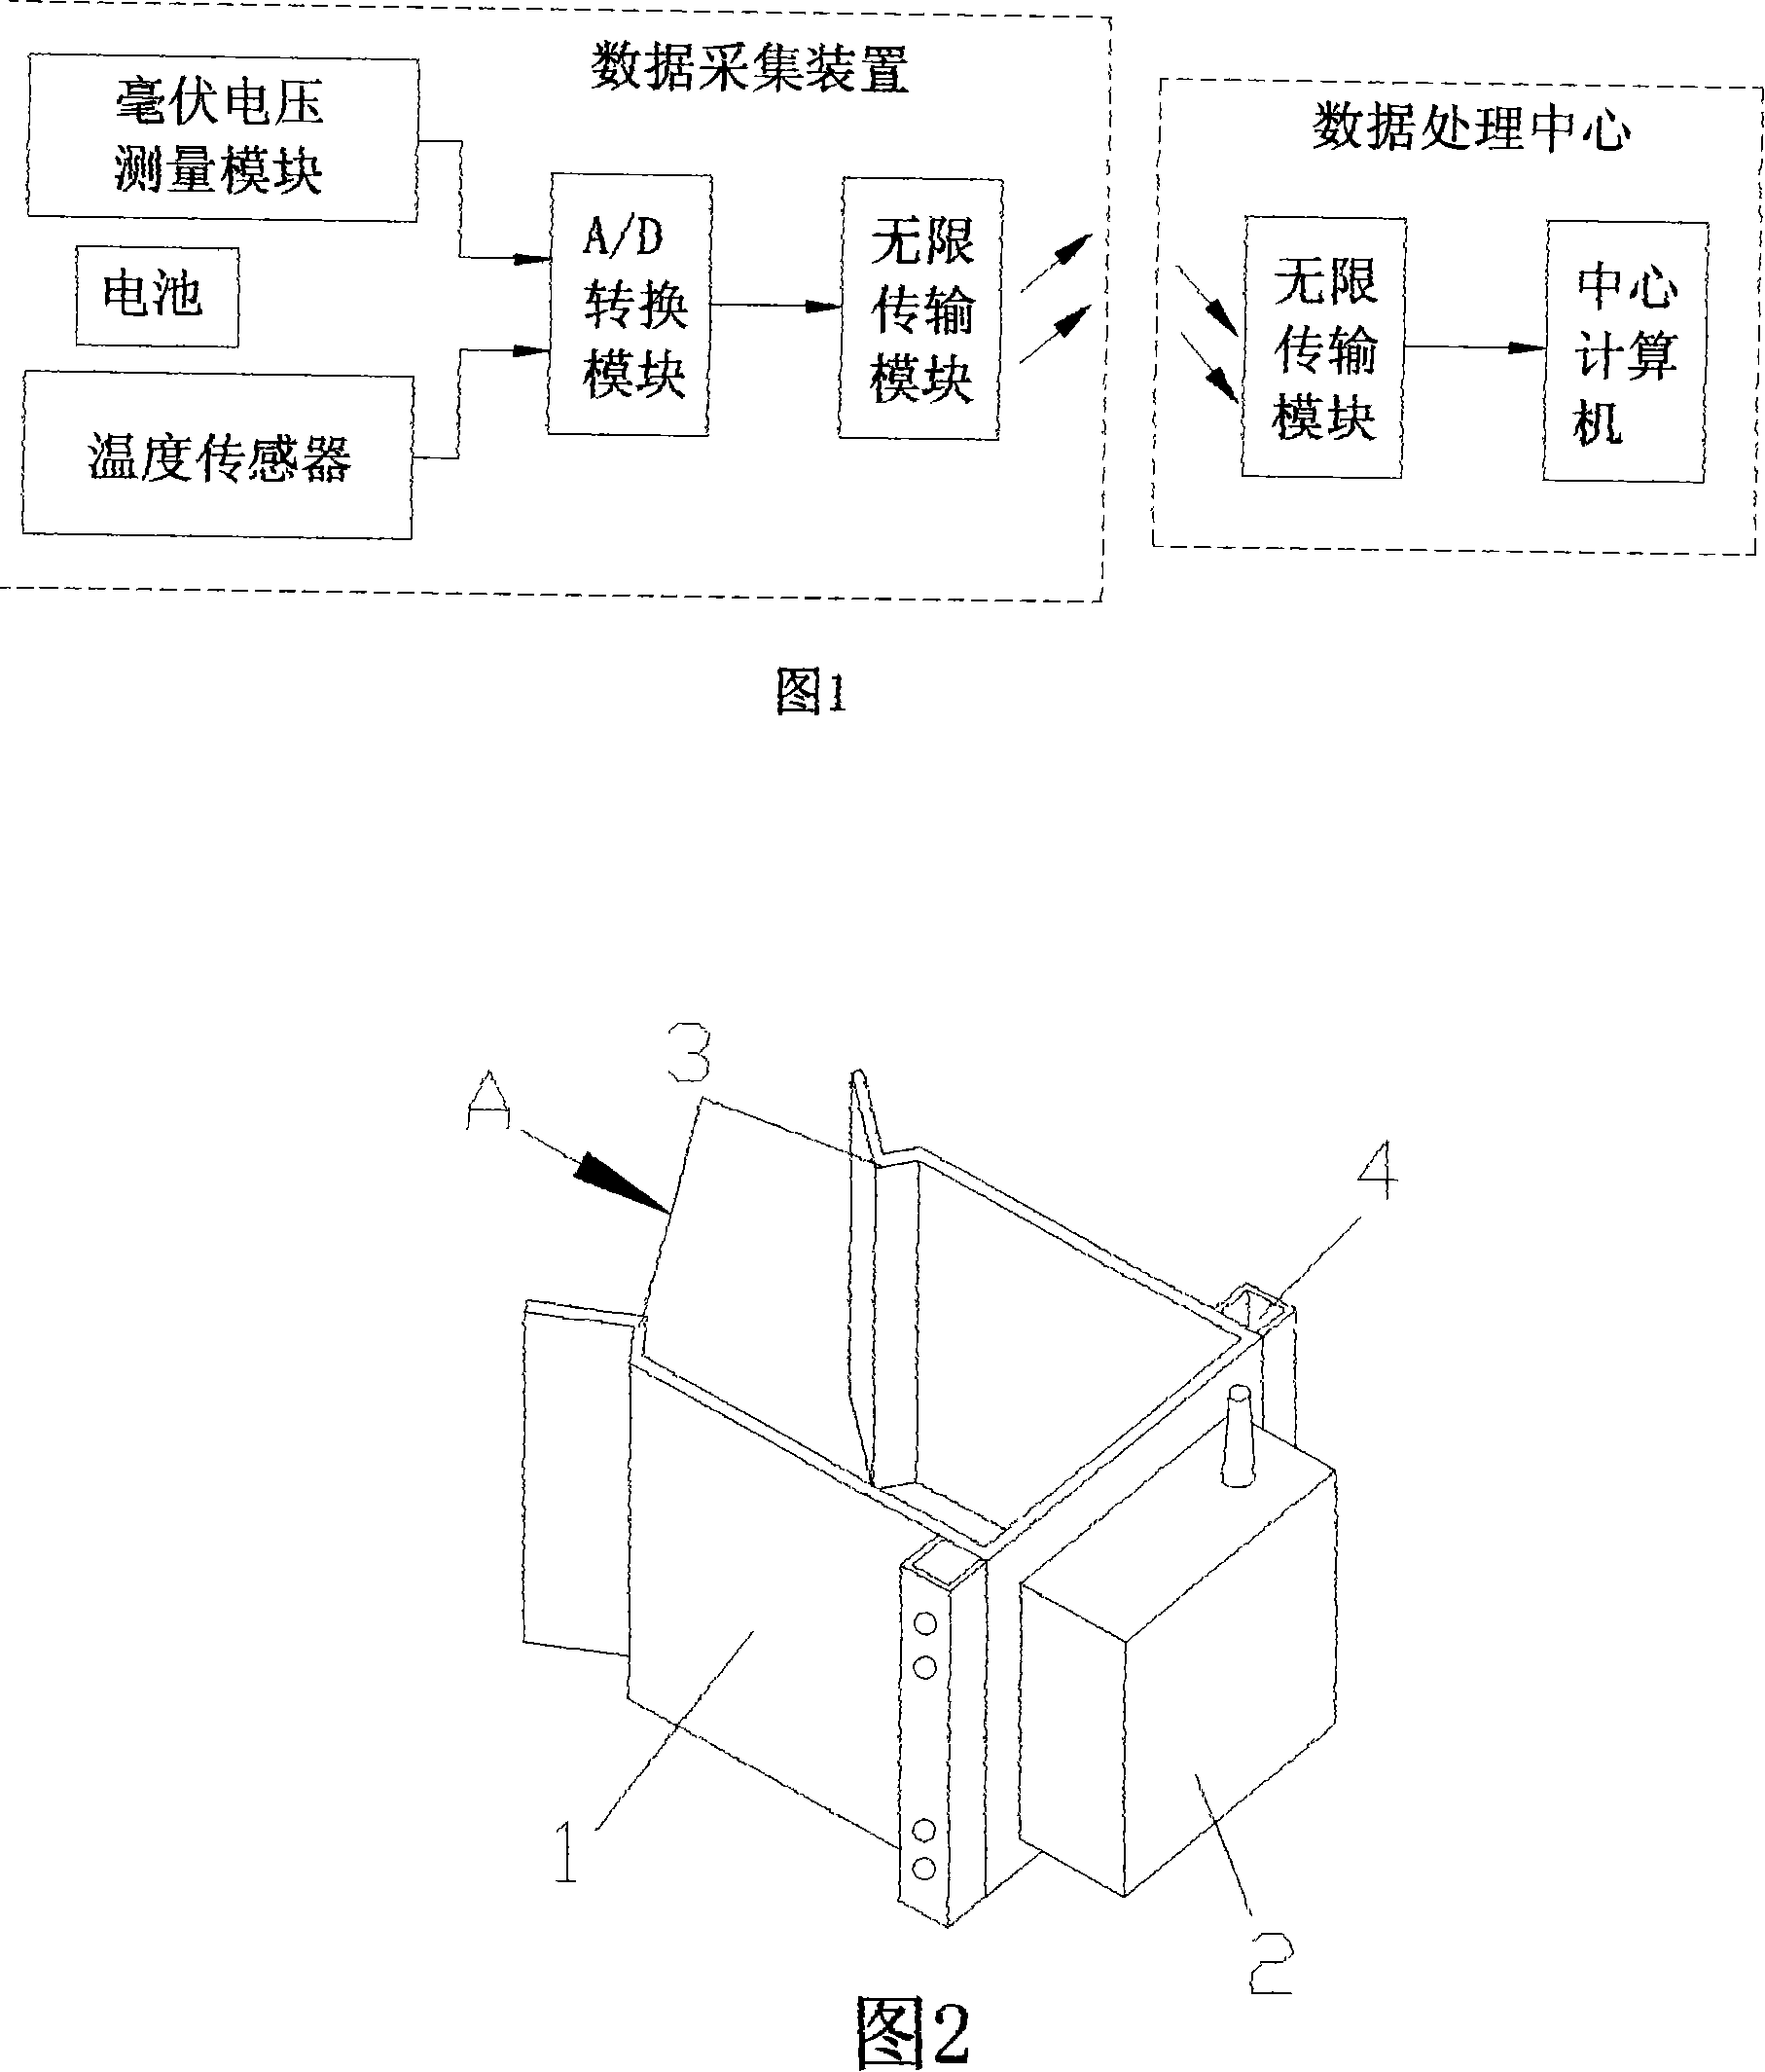 On-line testing method for aluminum cell anodic current distribution and monitoring device